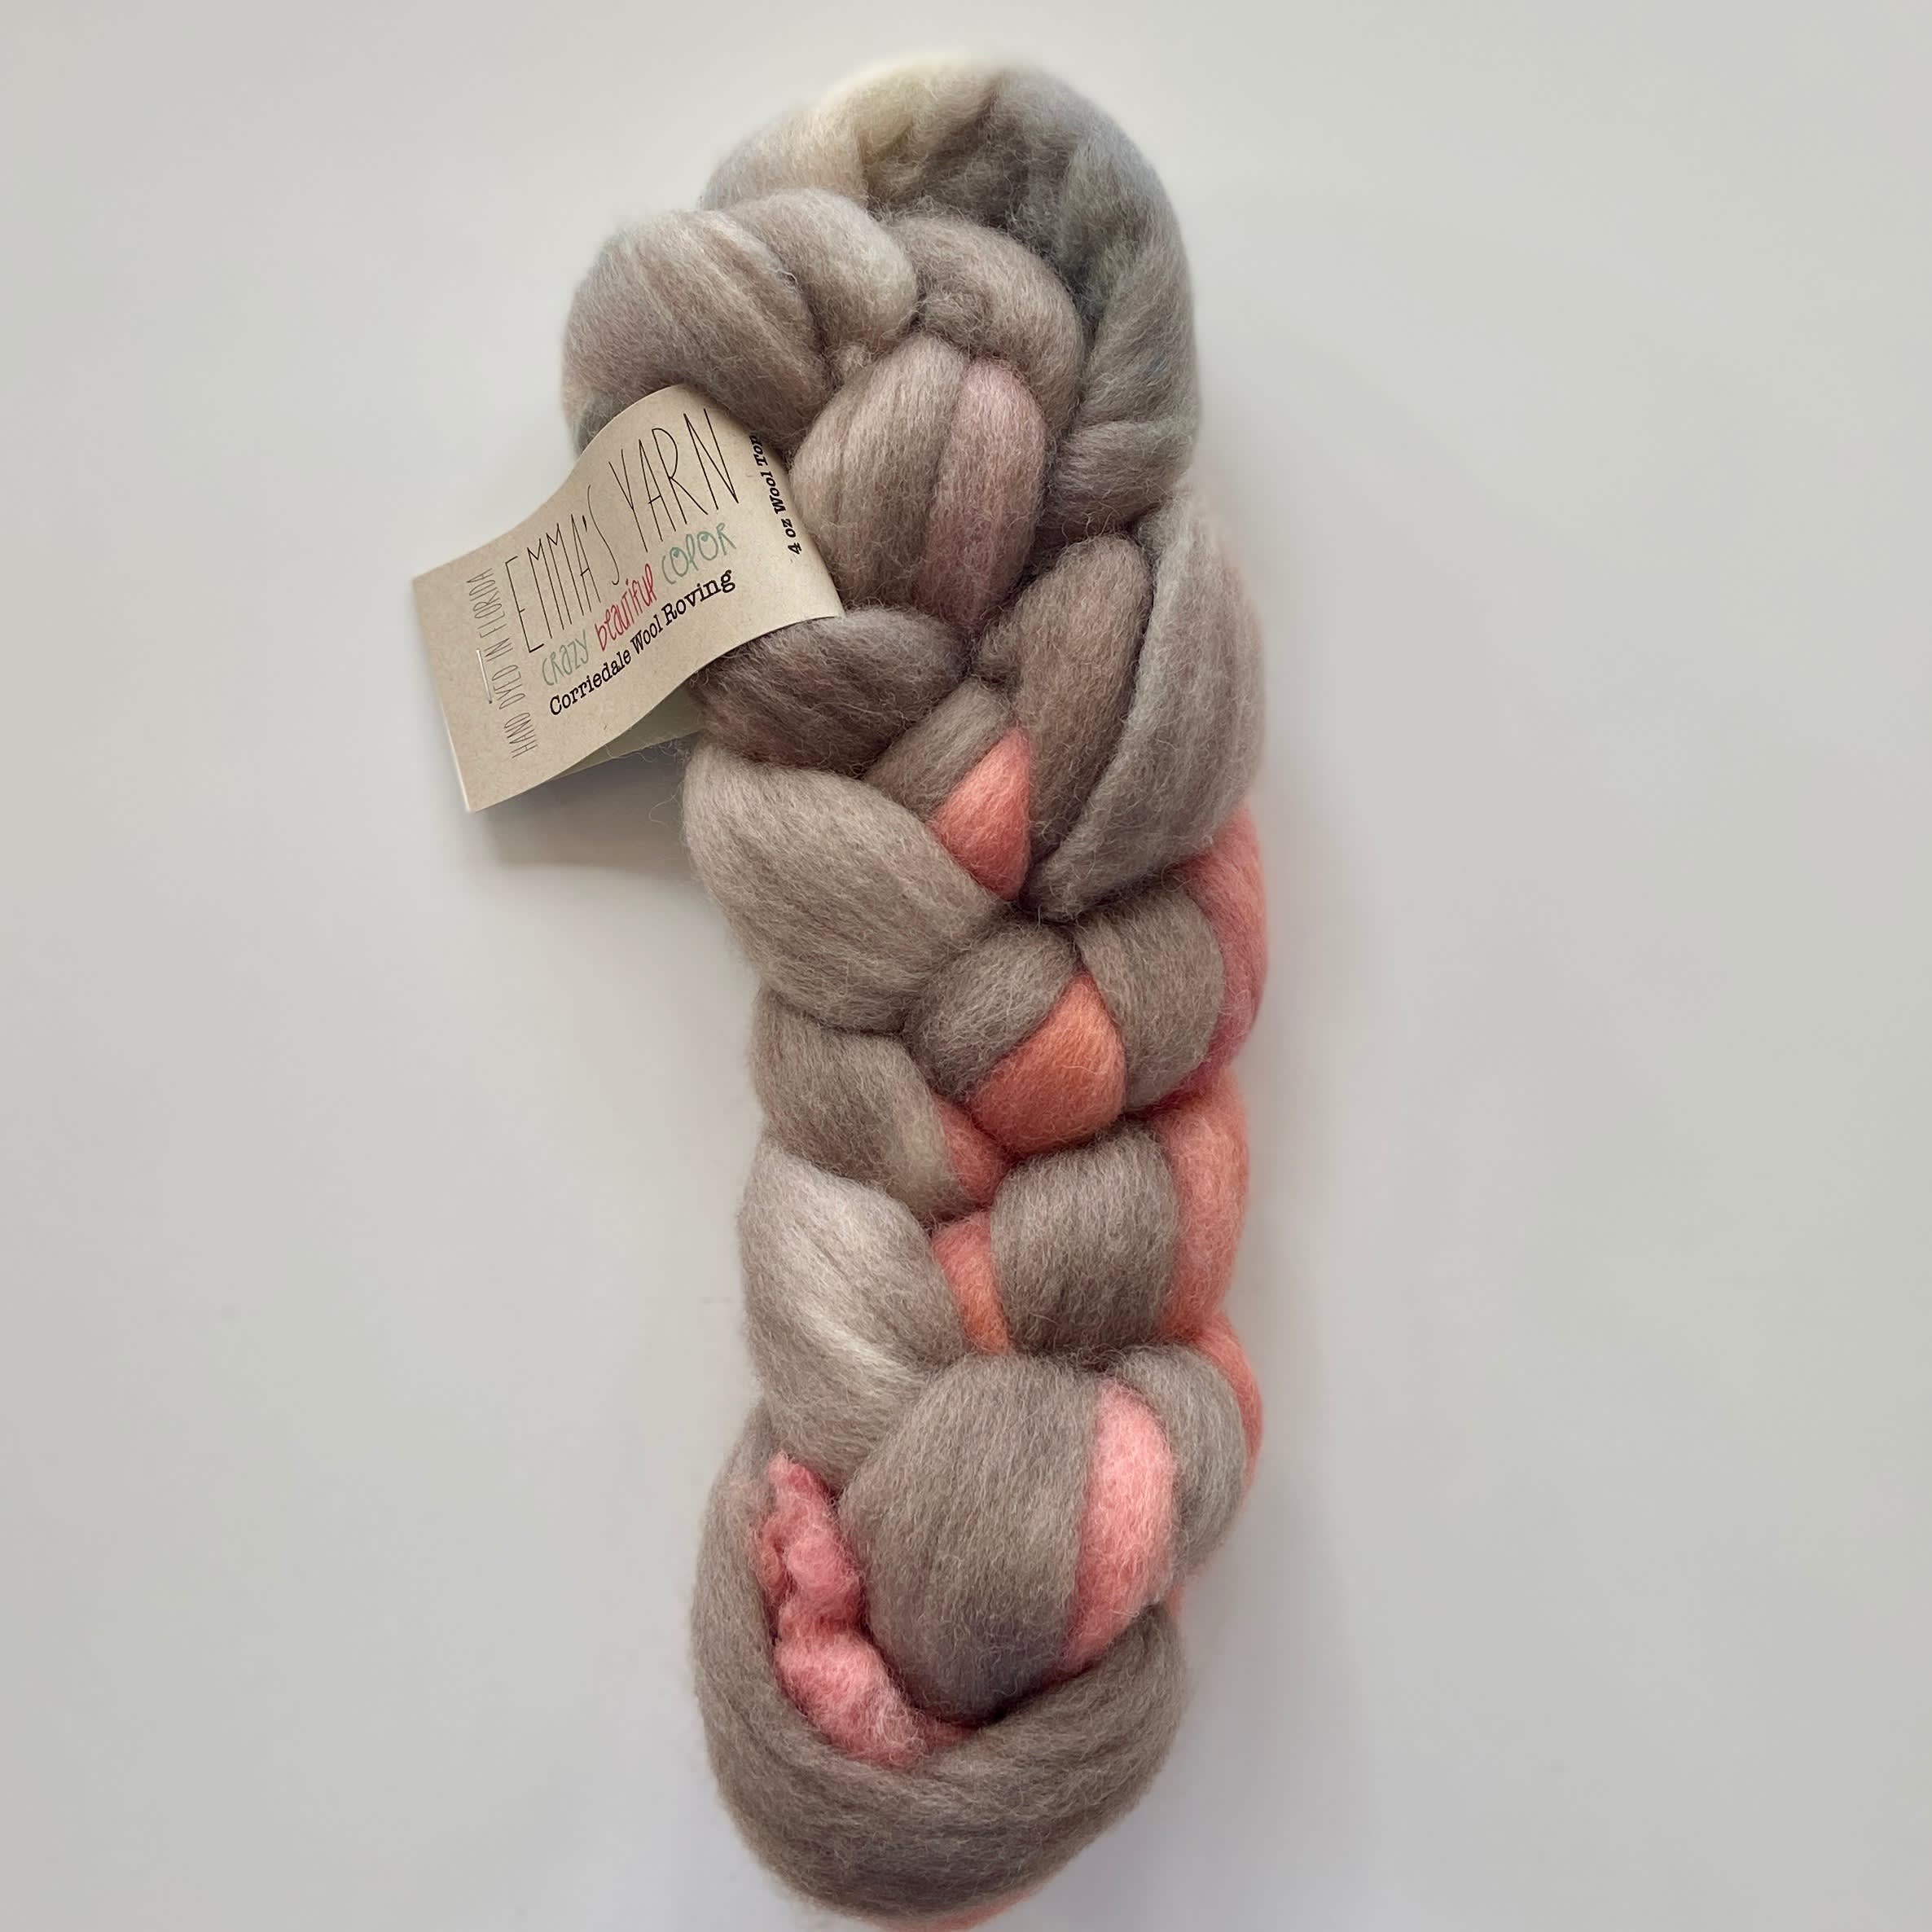 Corriedale Wool Roving Top (1 lb / 16 oz) | 28 Microns, Natural Brown  Undyed, Cleaned and Combed Core Wool